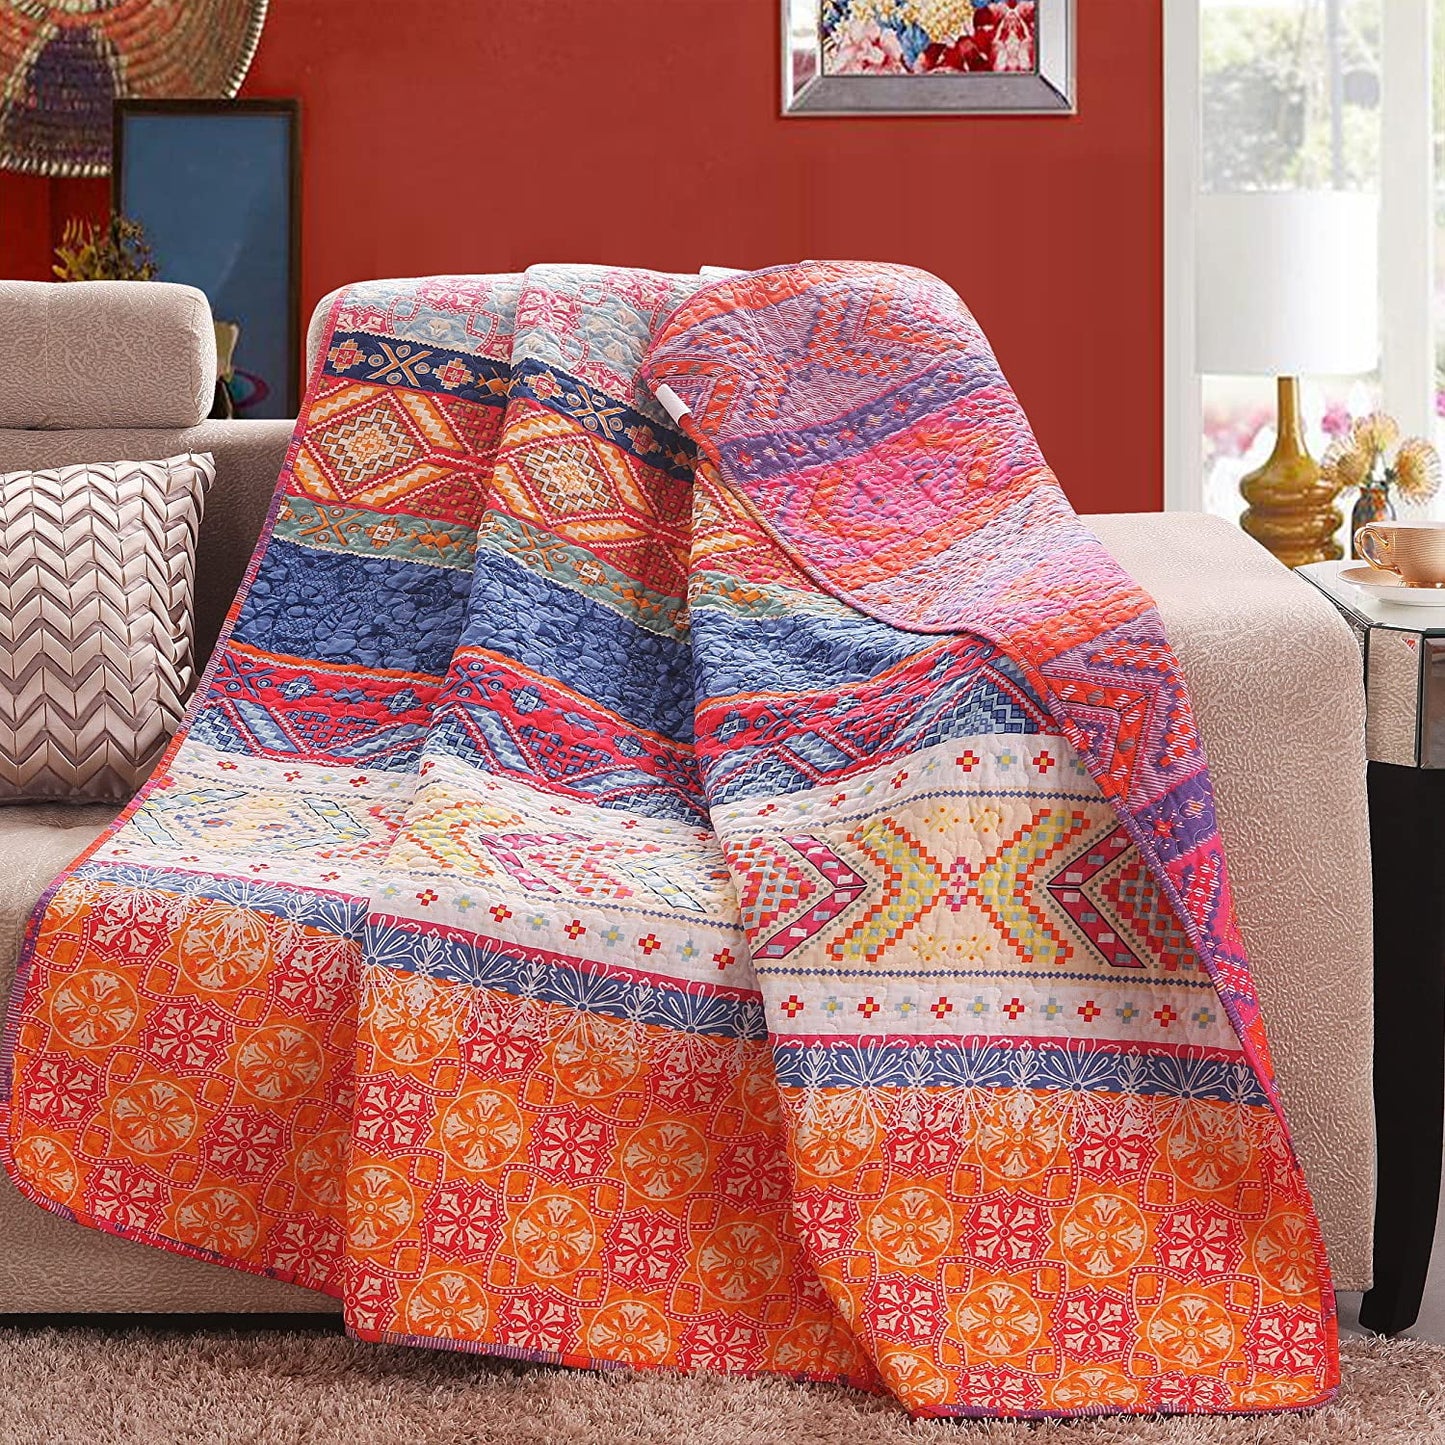 Exclusivo Mezcla Luxury Reversible 100% Cotton Multicolored Boho Stripe Quilted Throw Blanket 60" x 50" Machine Washable and Dryable